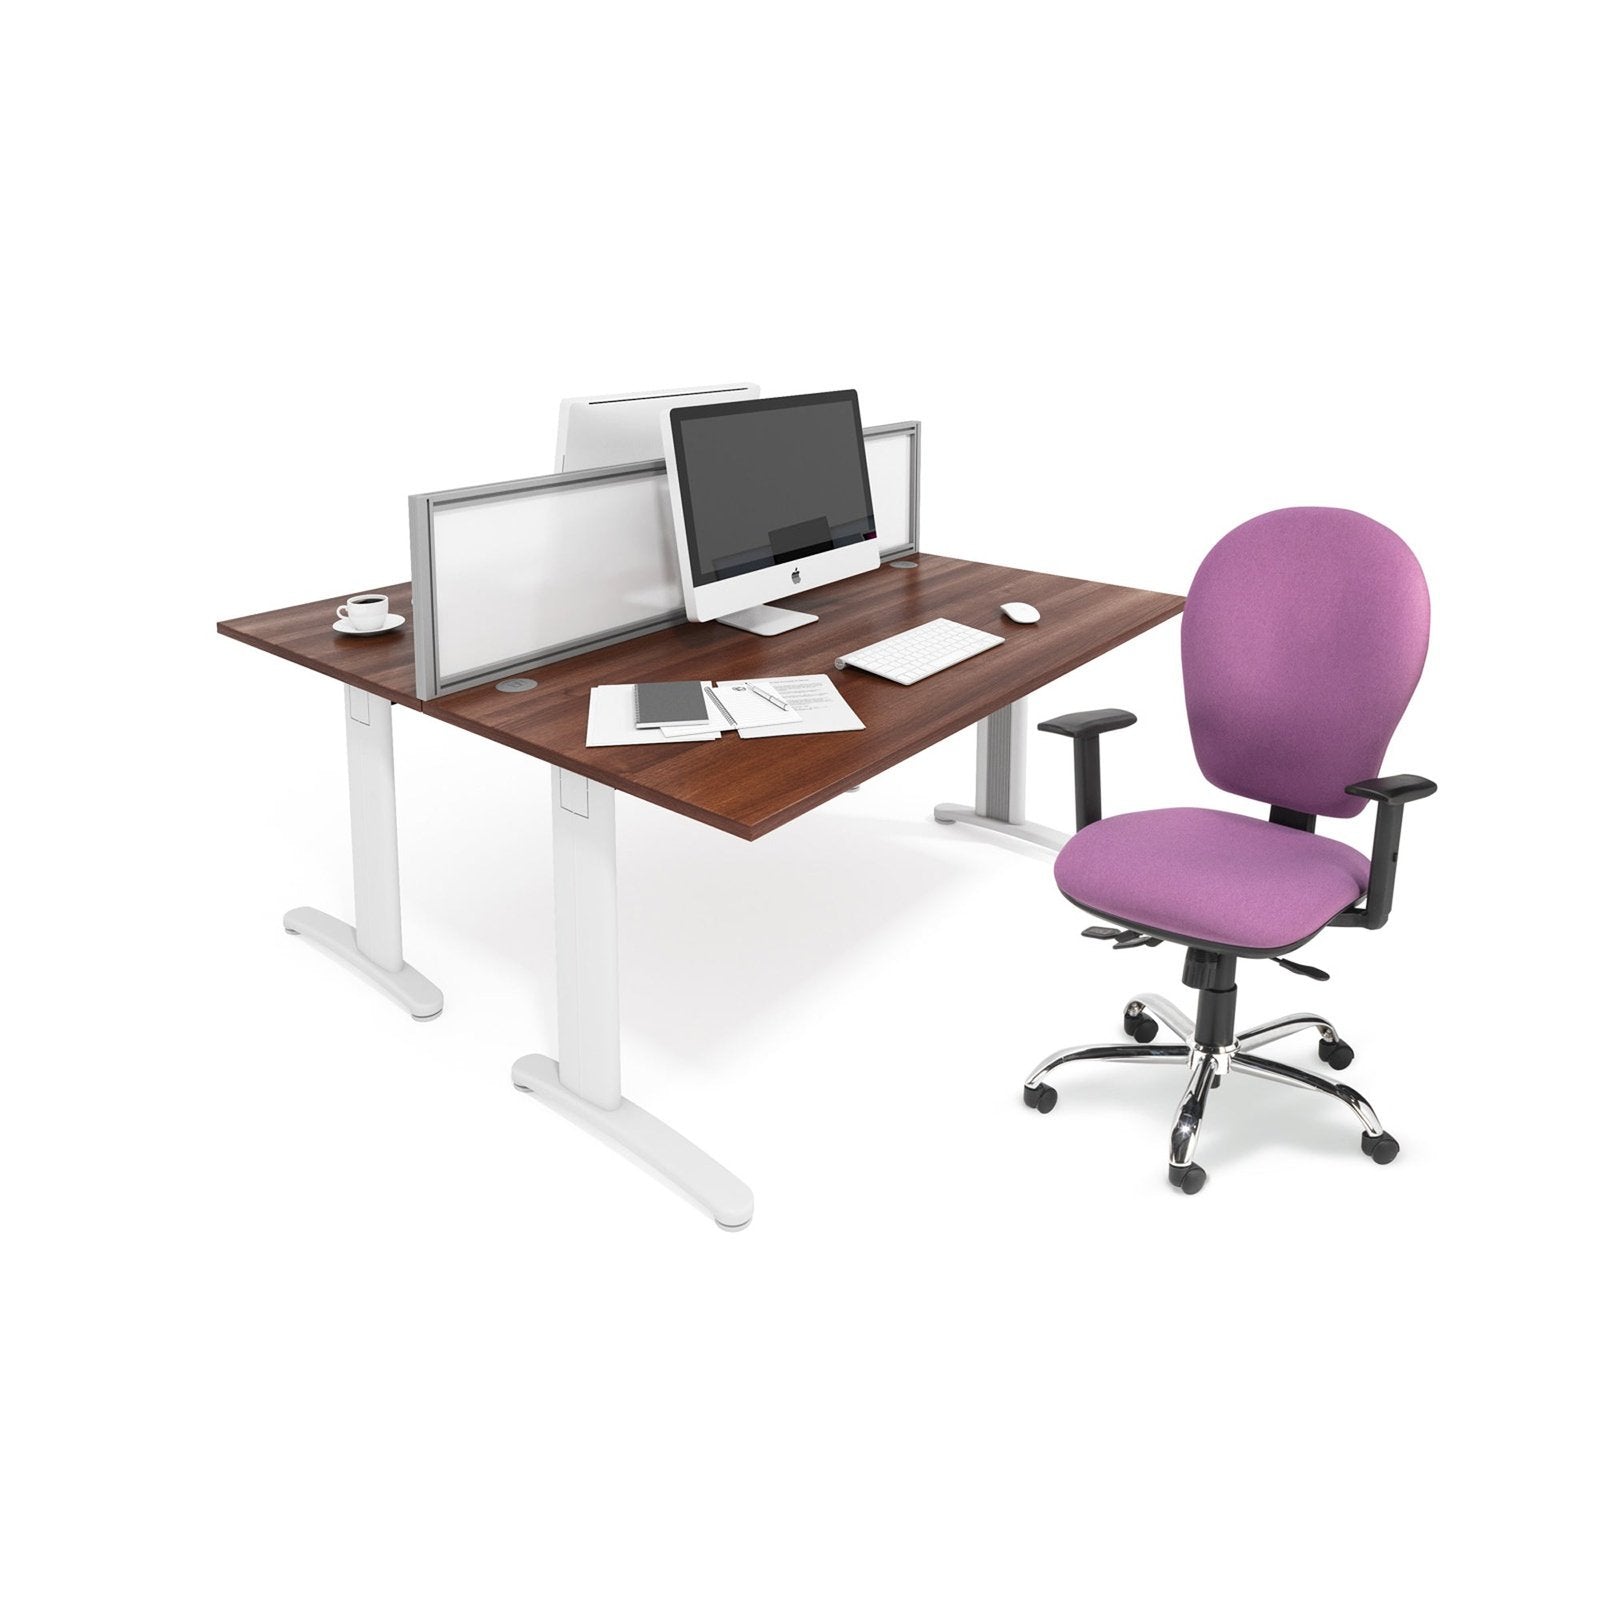 TR10 straight desk 600 deep - Office Products Online